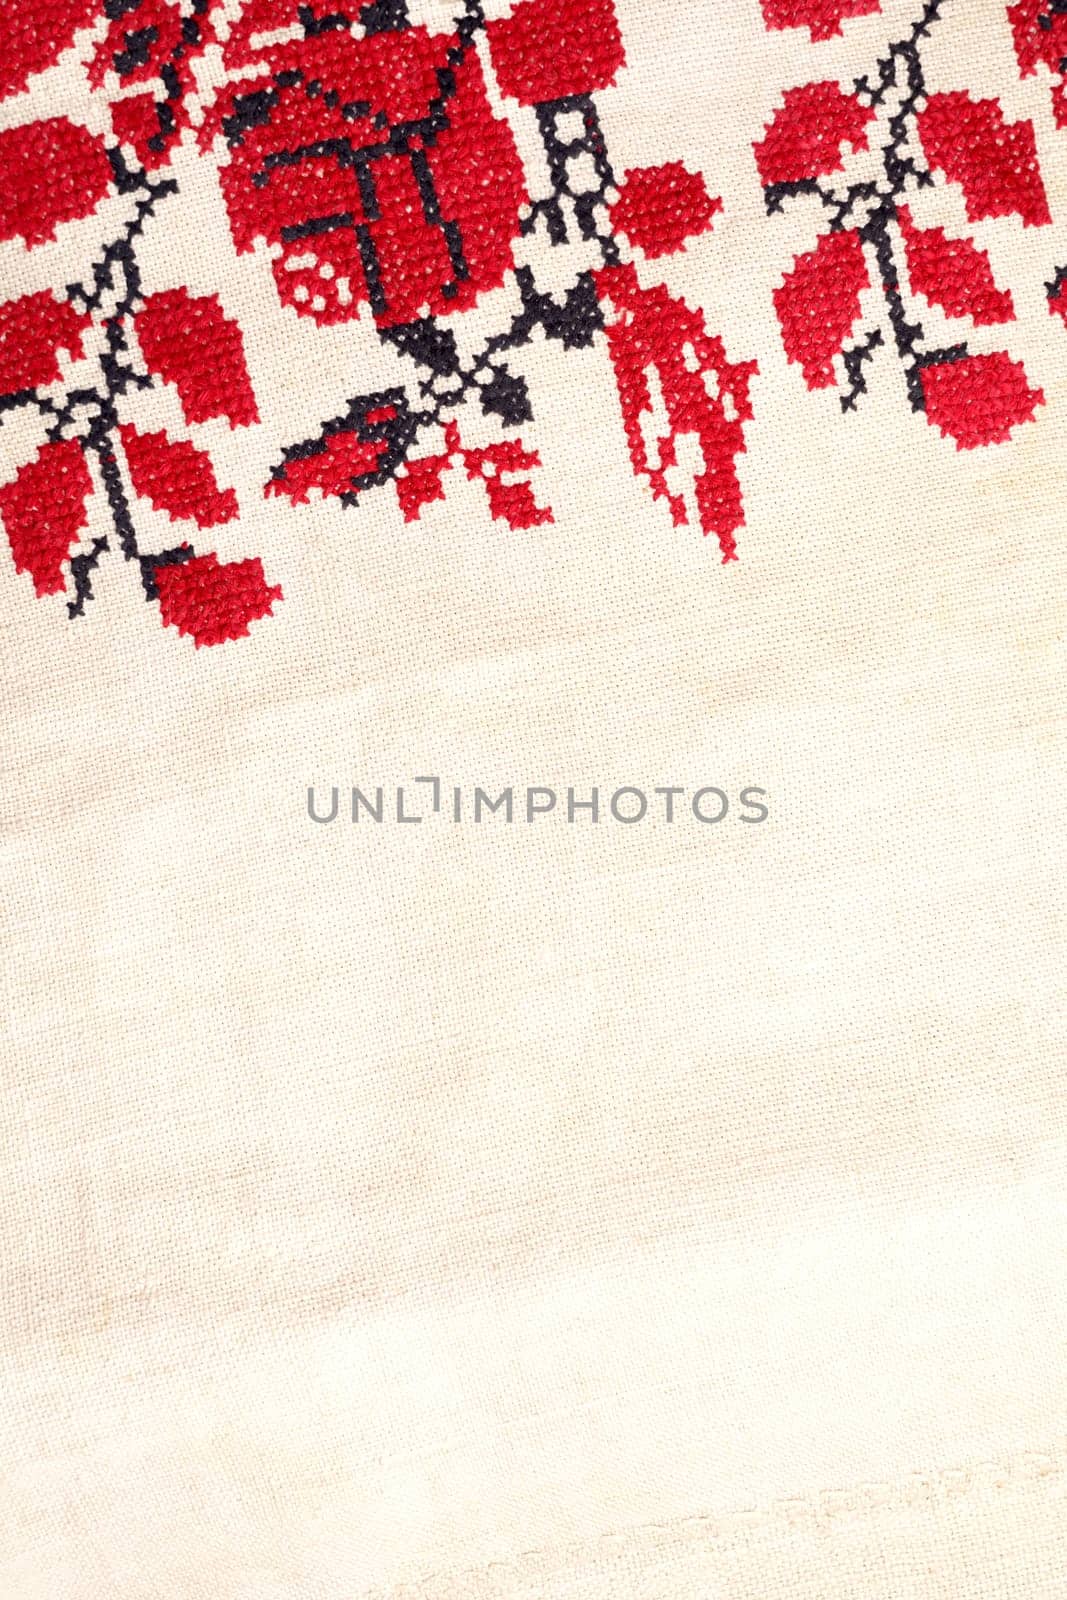 Line striped closeup weave fabric for kitchen towel material. Pinstripe fiber picnic table cloth . Black and red embroidery. Beige white farmhouse style stripes texture. Woven linen cloth pattern background. Embroidered good like old handmade cross-stitch ethnic Ukraine pattern. Ukrainian rushnyk . Red version over white background. by aprilphoto